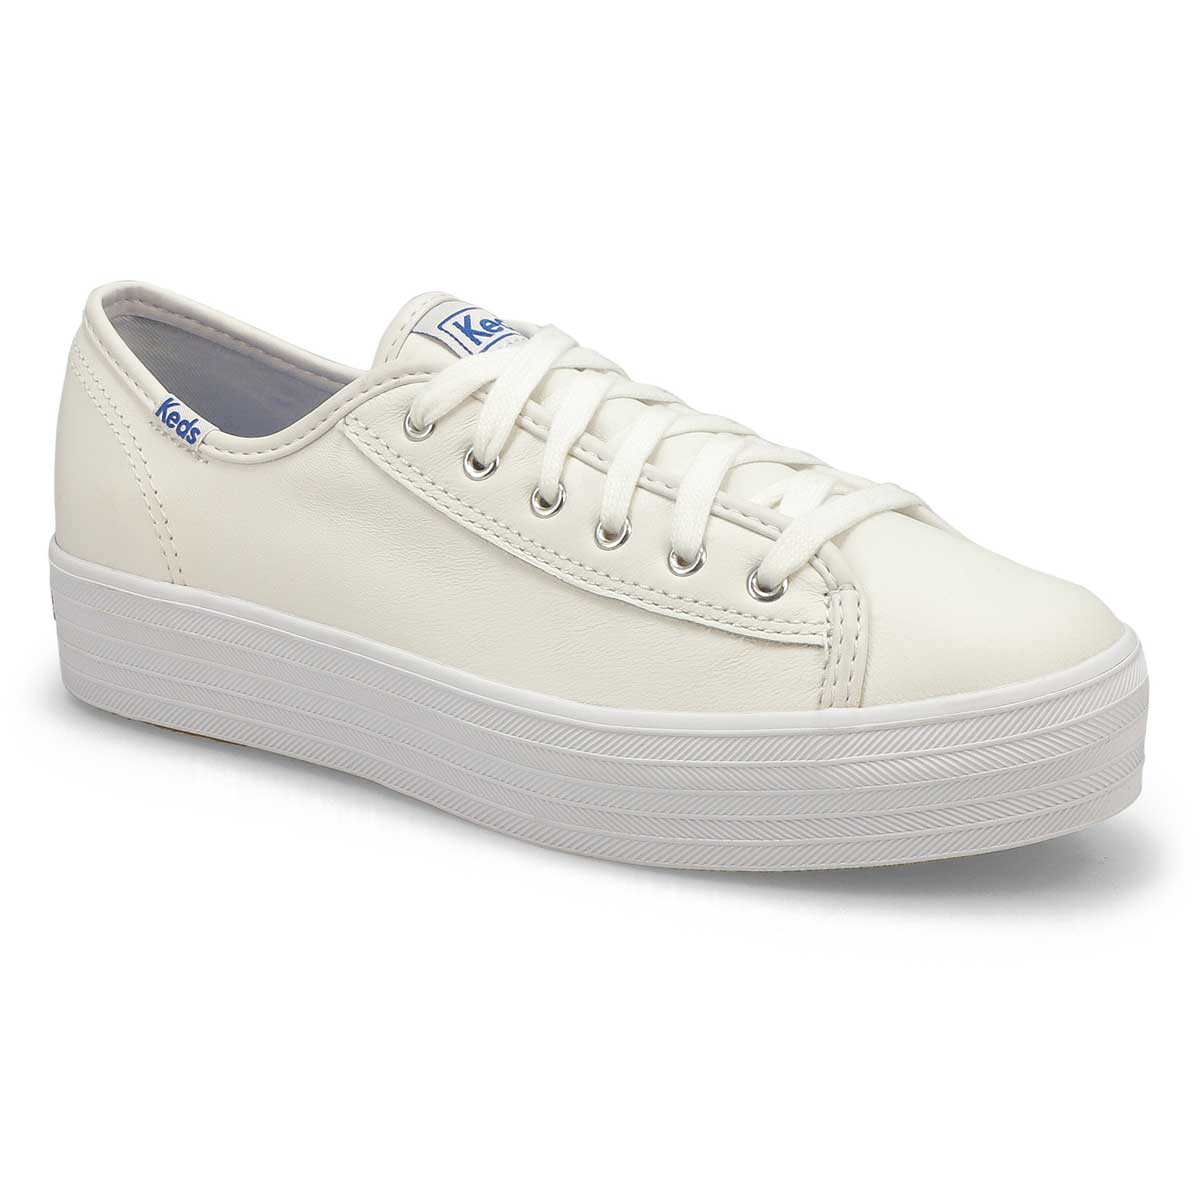 ked white sneakers